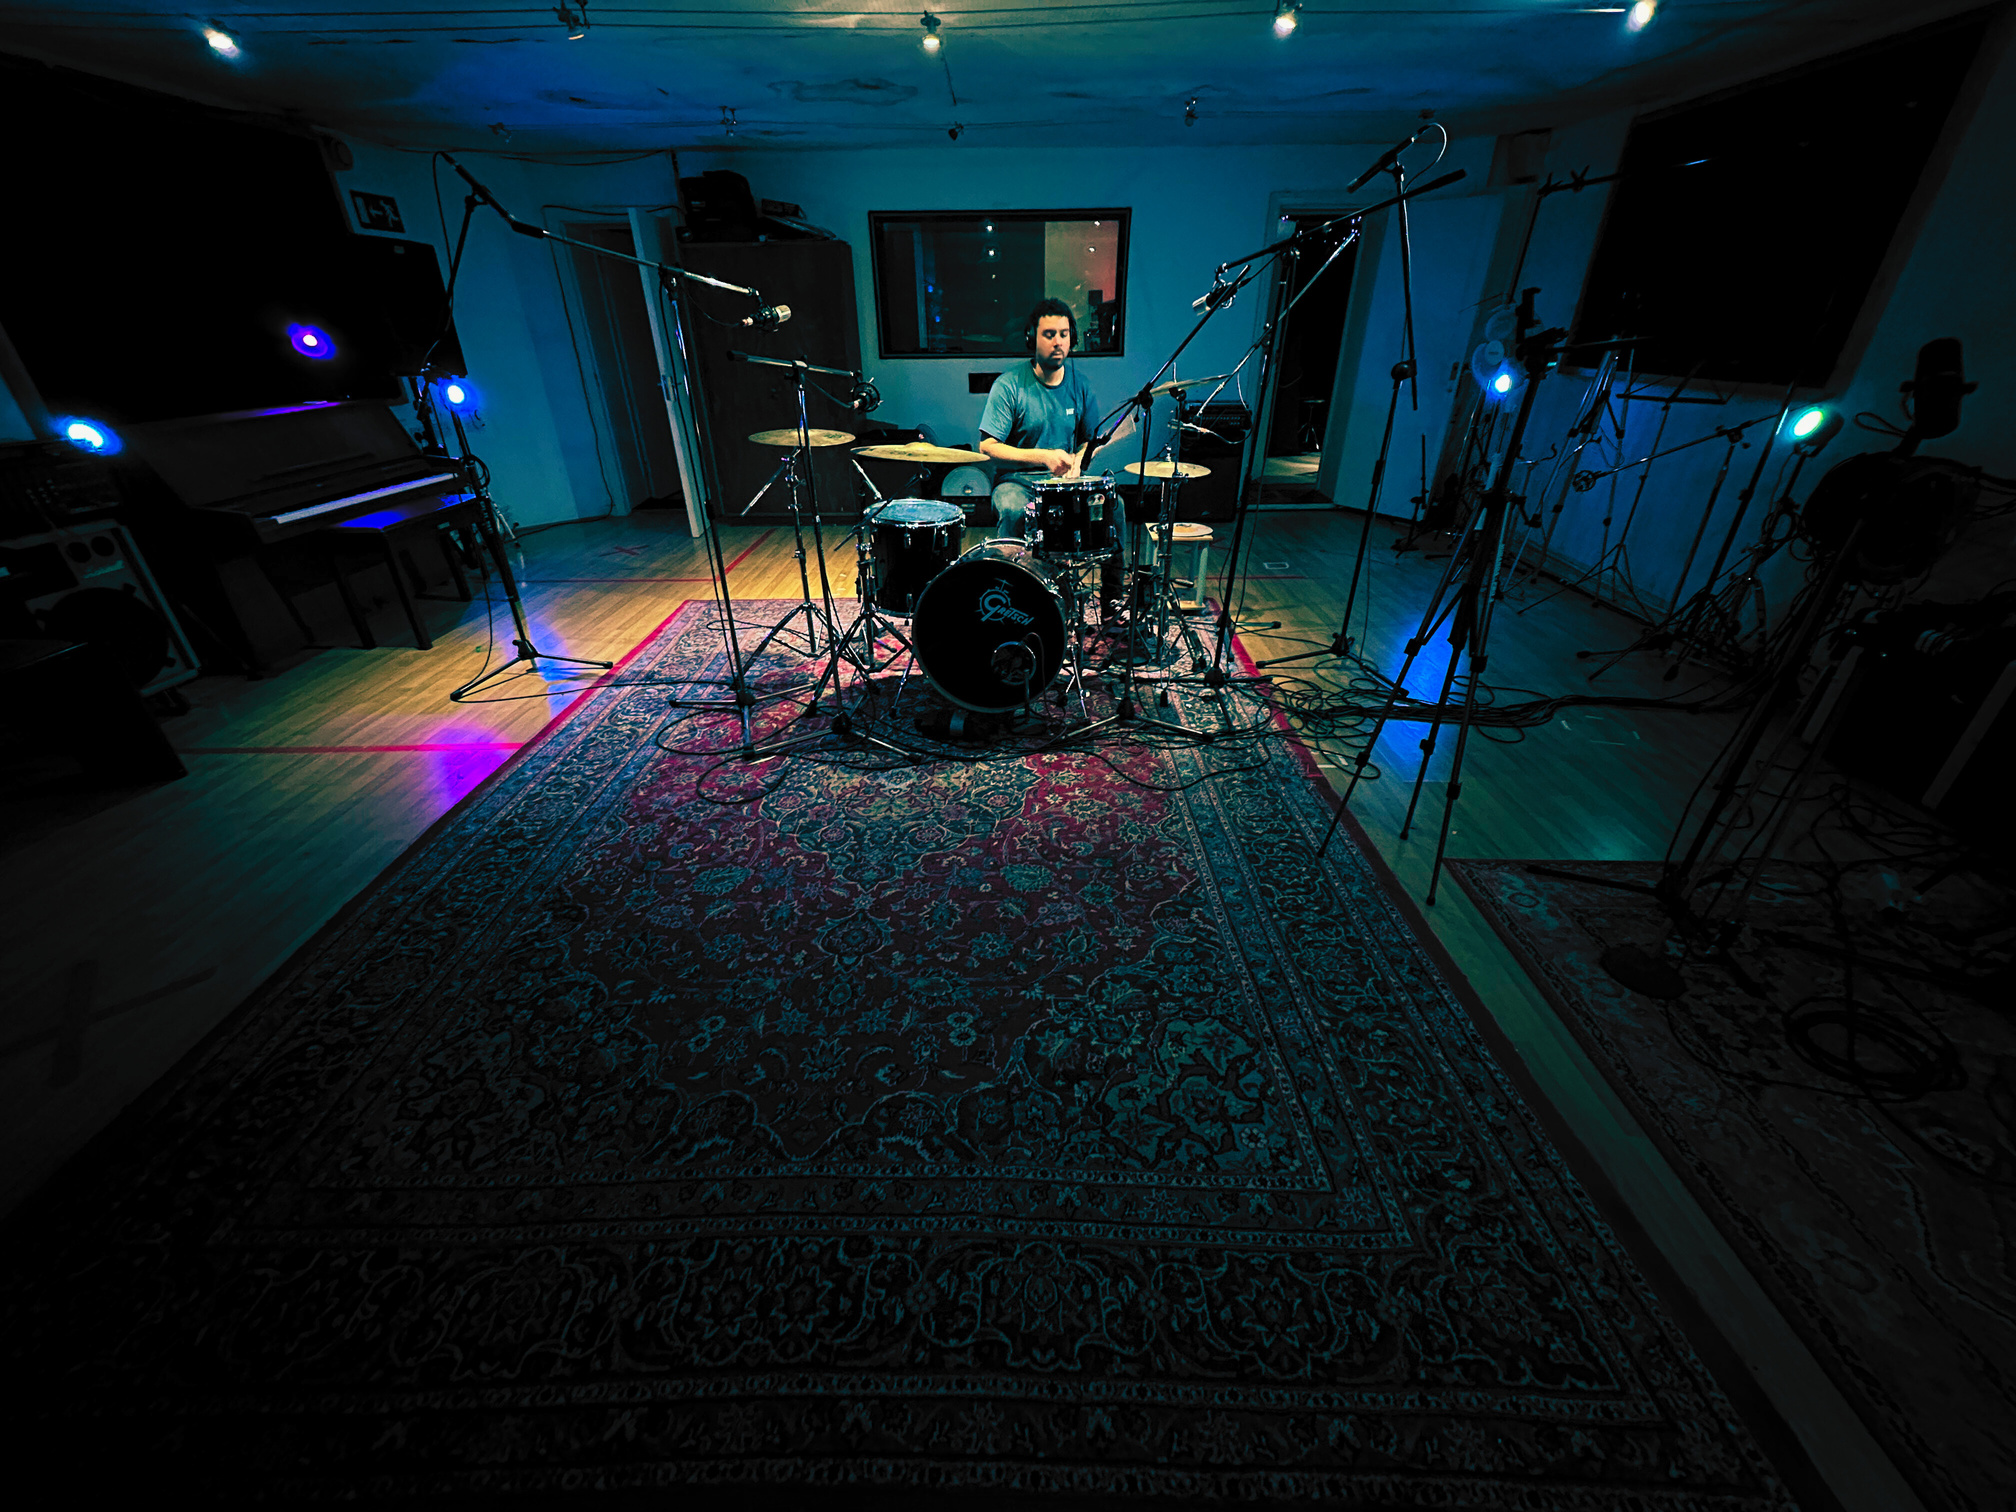 Lewis sits at the drum kit, sticks in hand playing a steady  beat in VIBE Recording Studio, Manchester. In the picture, the drumkit starts about two thirds of the way up, surrounded by hushed blue live room lighting and decorative long rug.